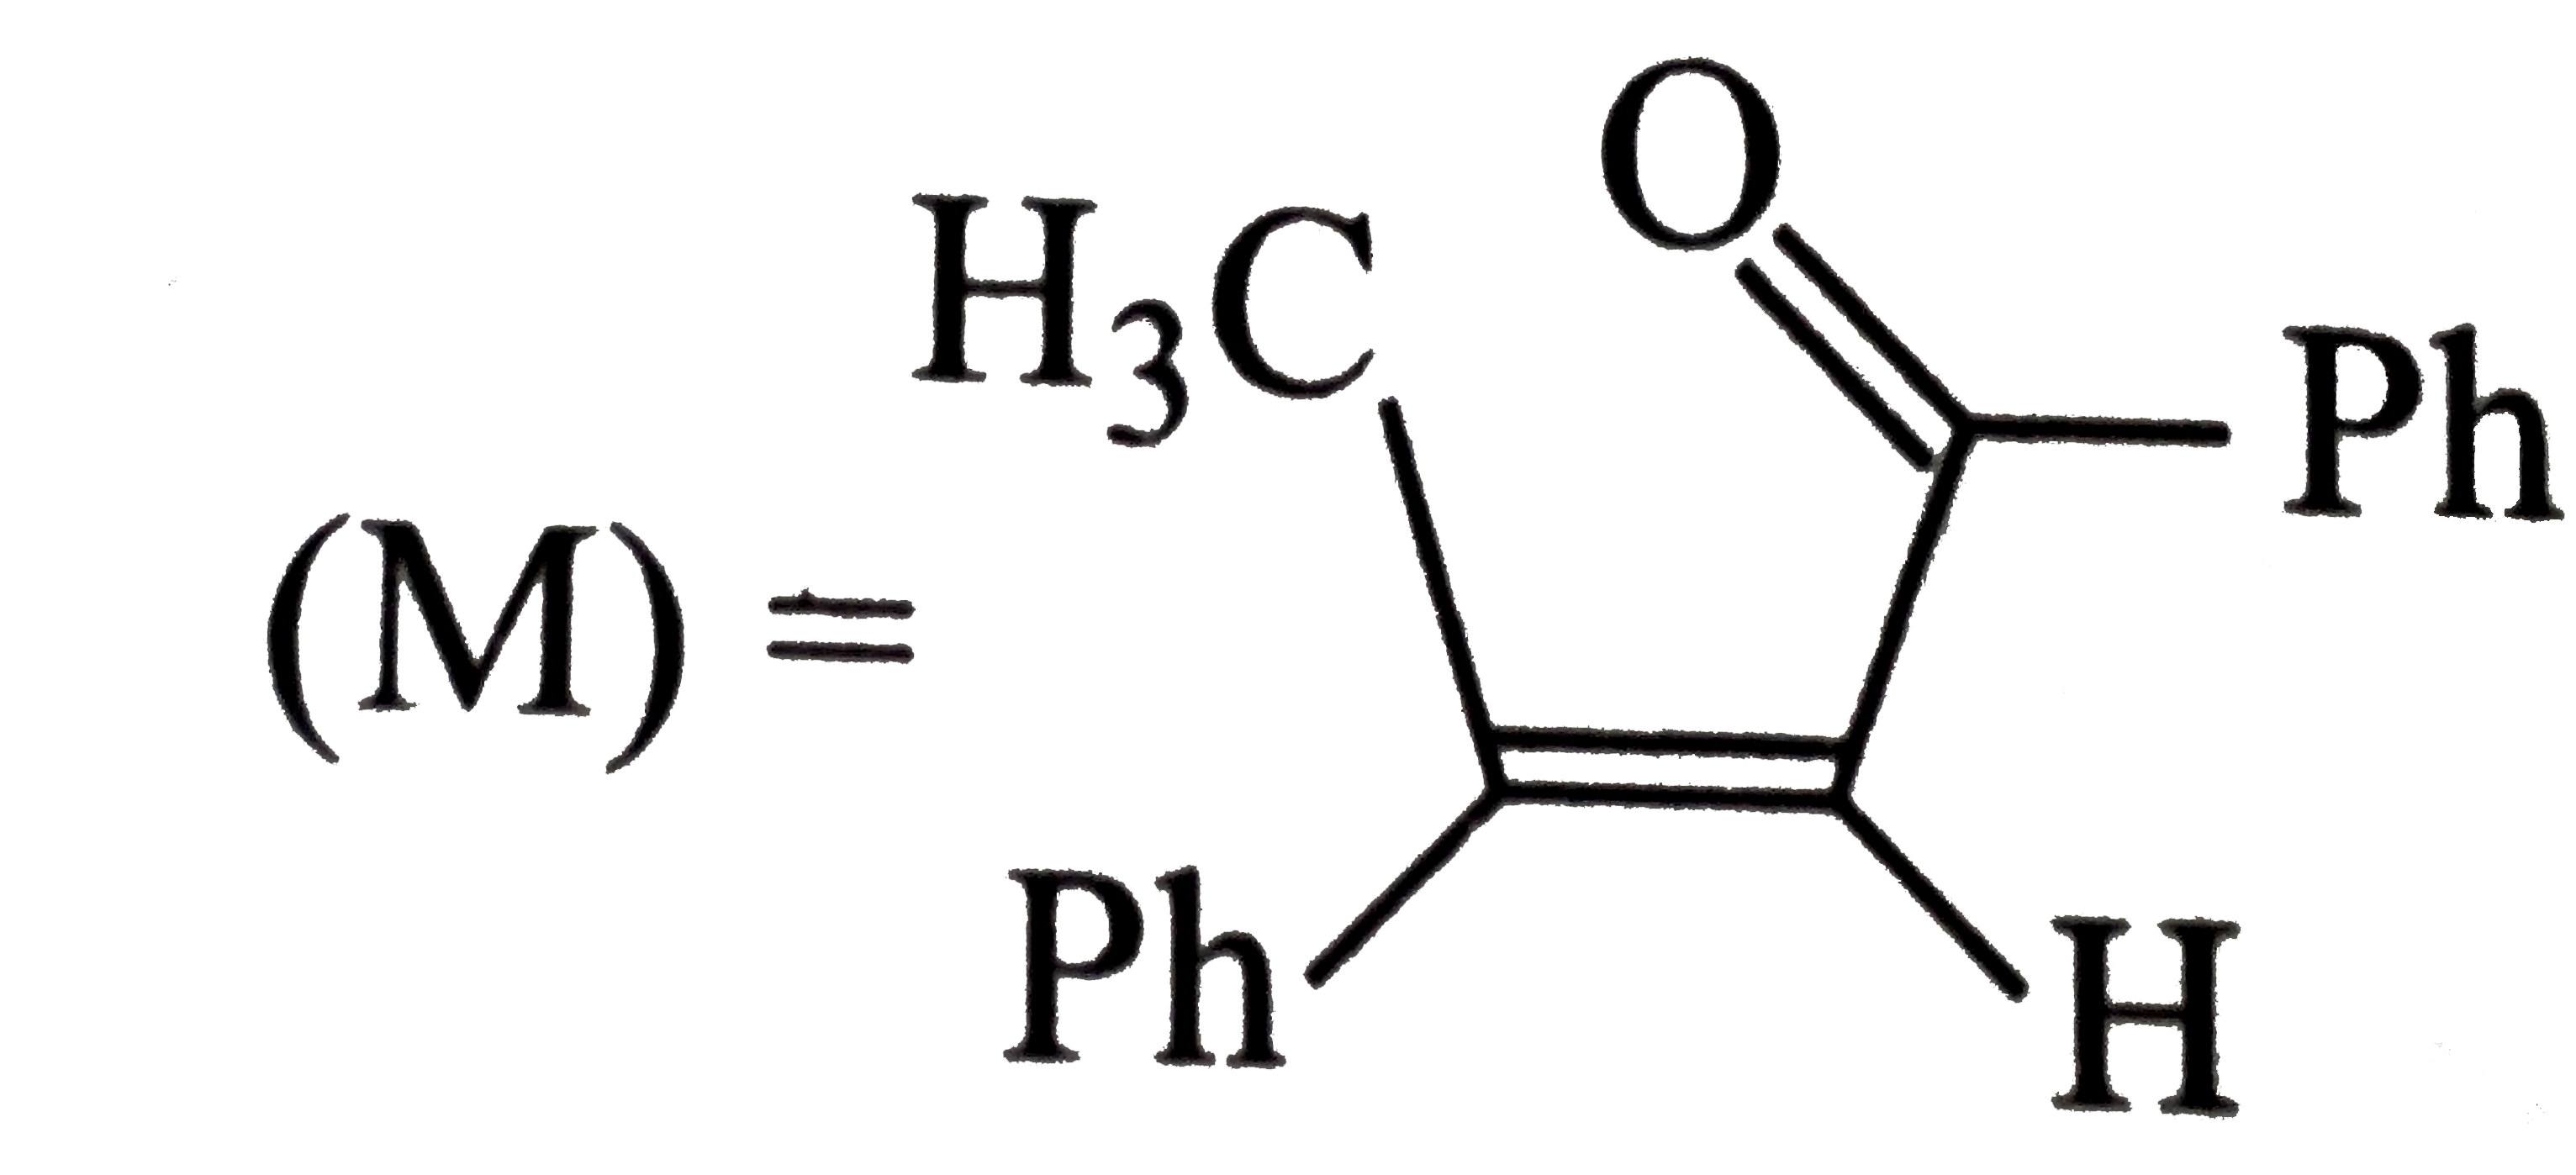 A tertiary alcohol (H) upon acid-catalysed dehydration gives a product (I). Ozonolysis of (I) leads to compounds (J) and (K). Compound (J) upon reaction with KOH gives benzyl alcohol and a compound (L), whereas (K) on reaction with KOH gives only (M).      Compound (H) is formed by the reaction of: